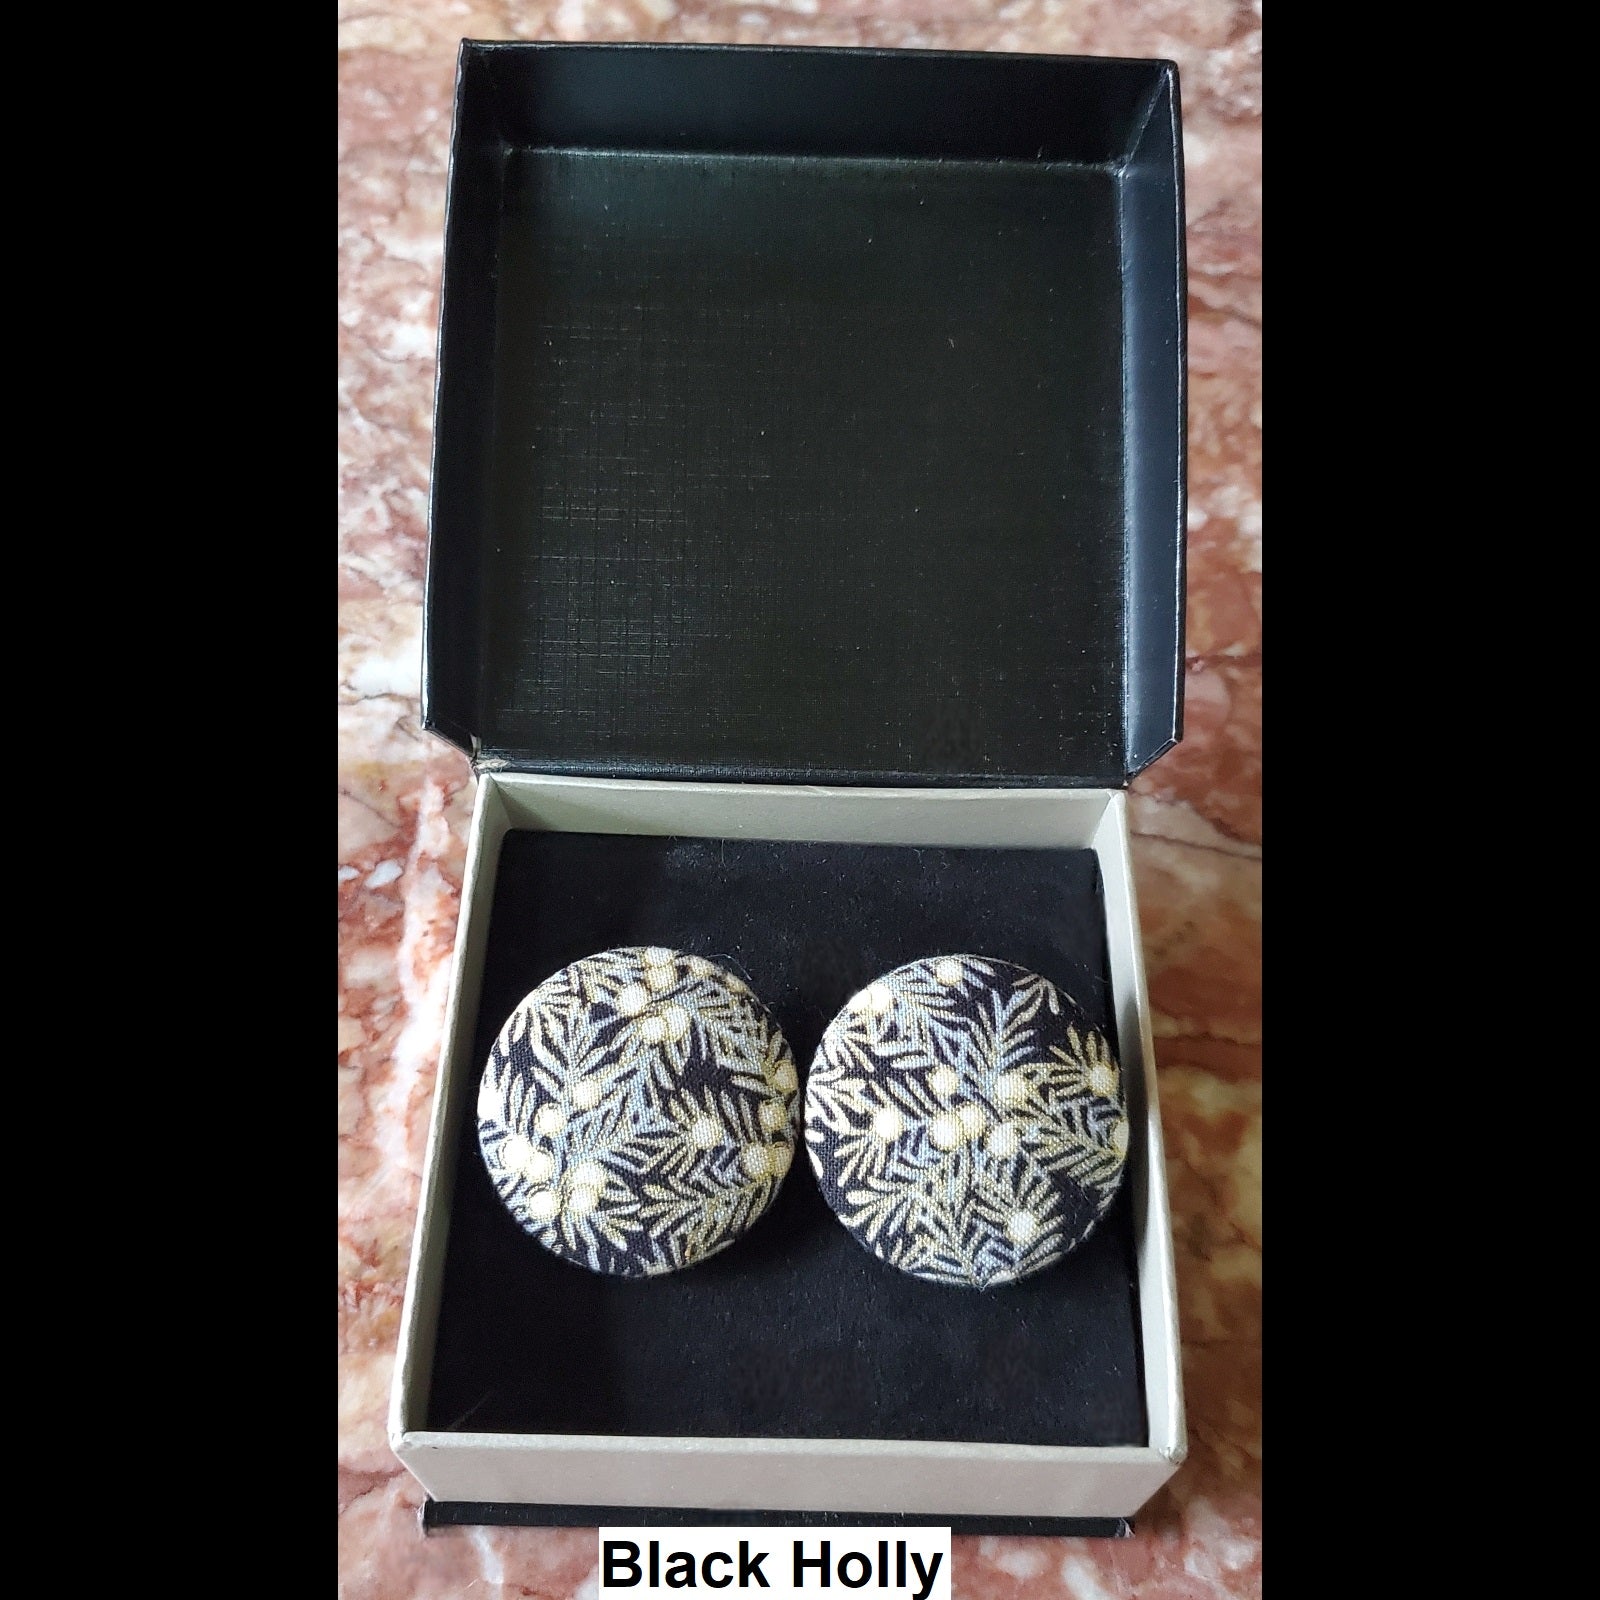 Black holly print button earrings in jewelry box